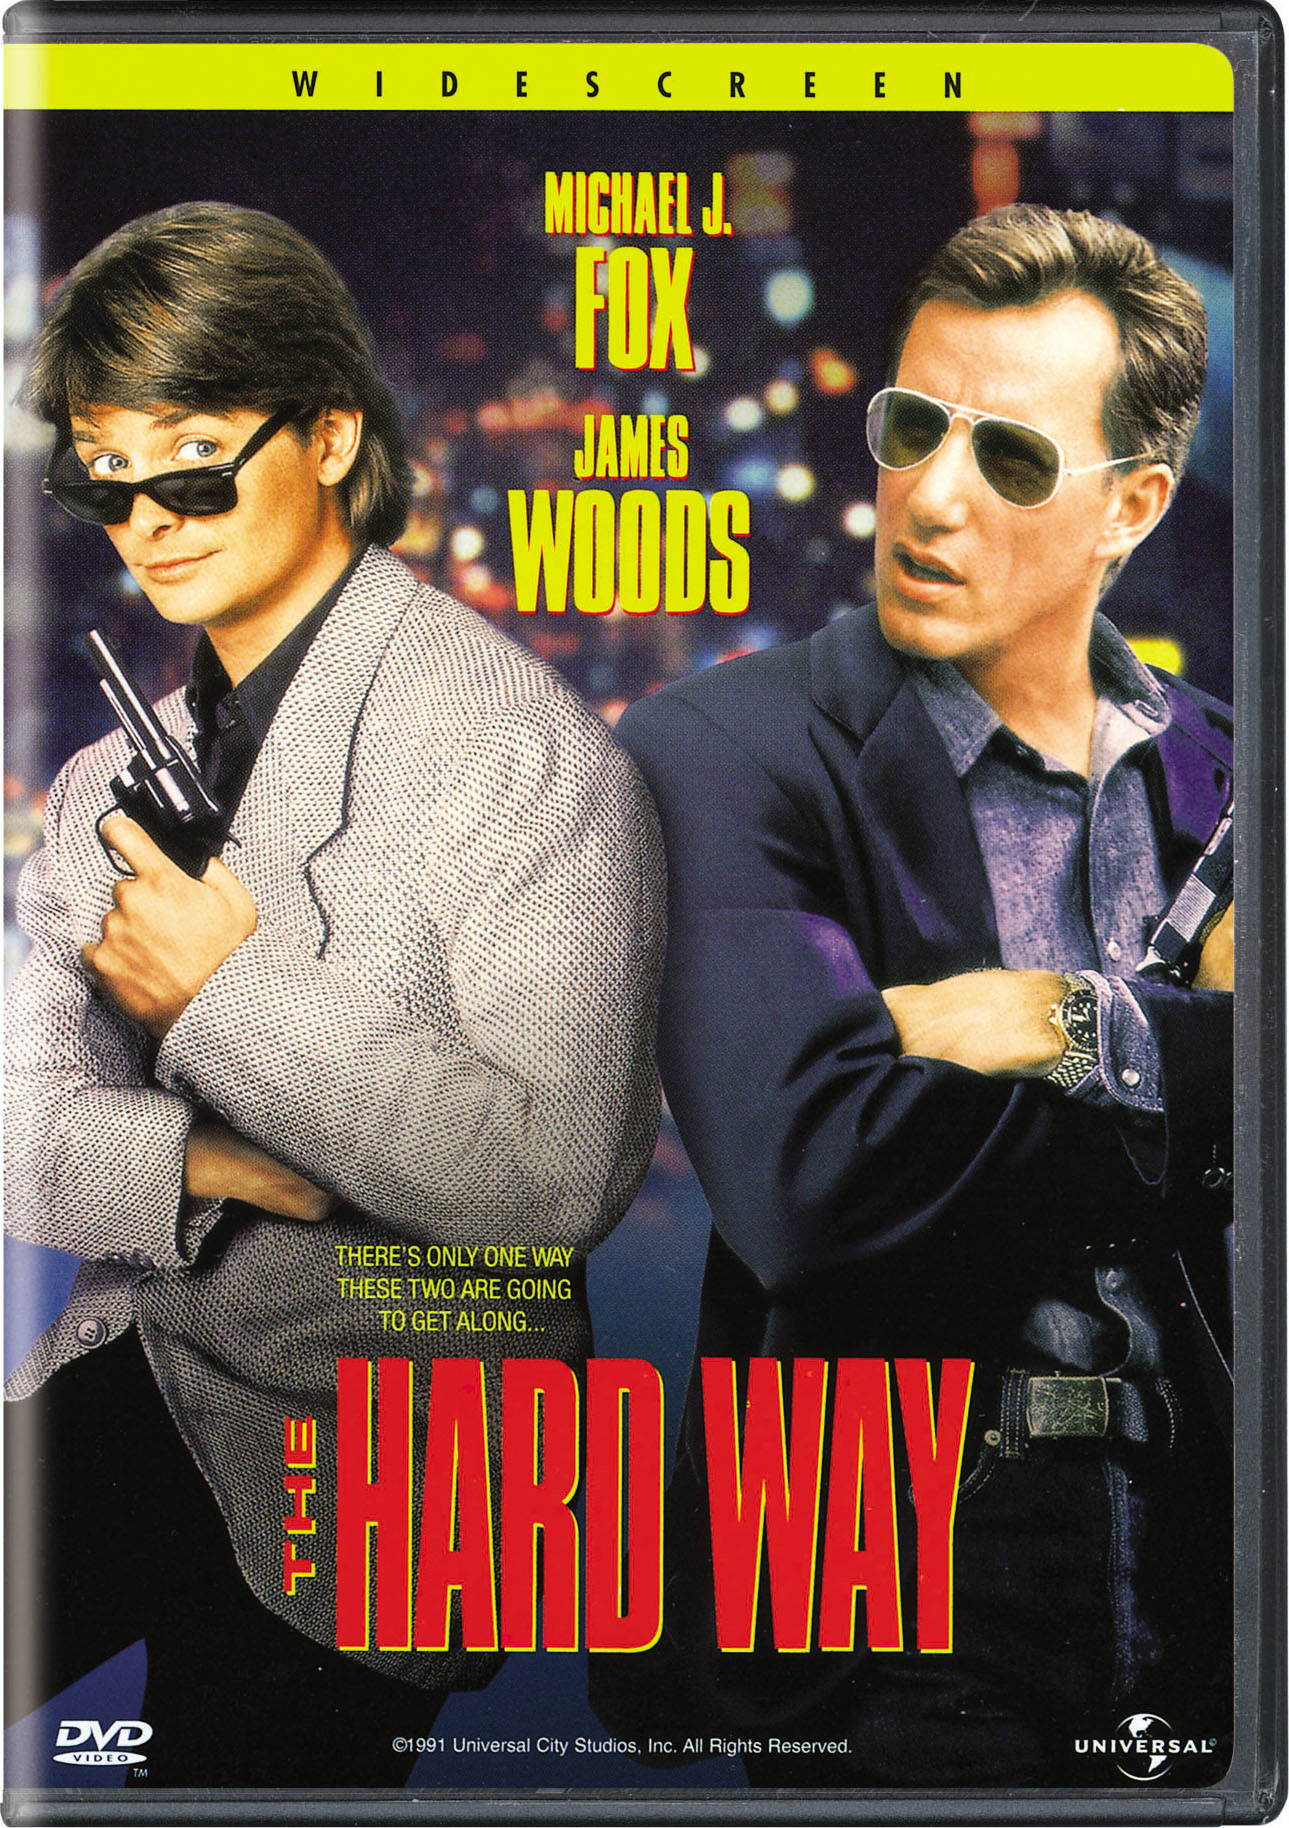 The Hard Way (DVD Widescreen) - DVD [ 1991 ]  - Action Movies On DVD - Movies On GRUV